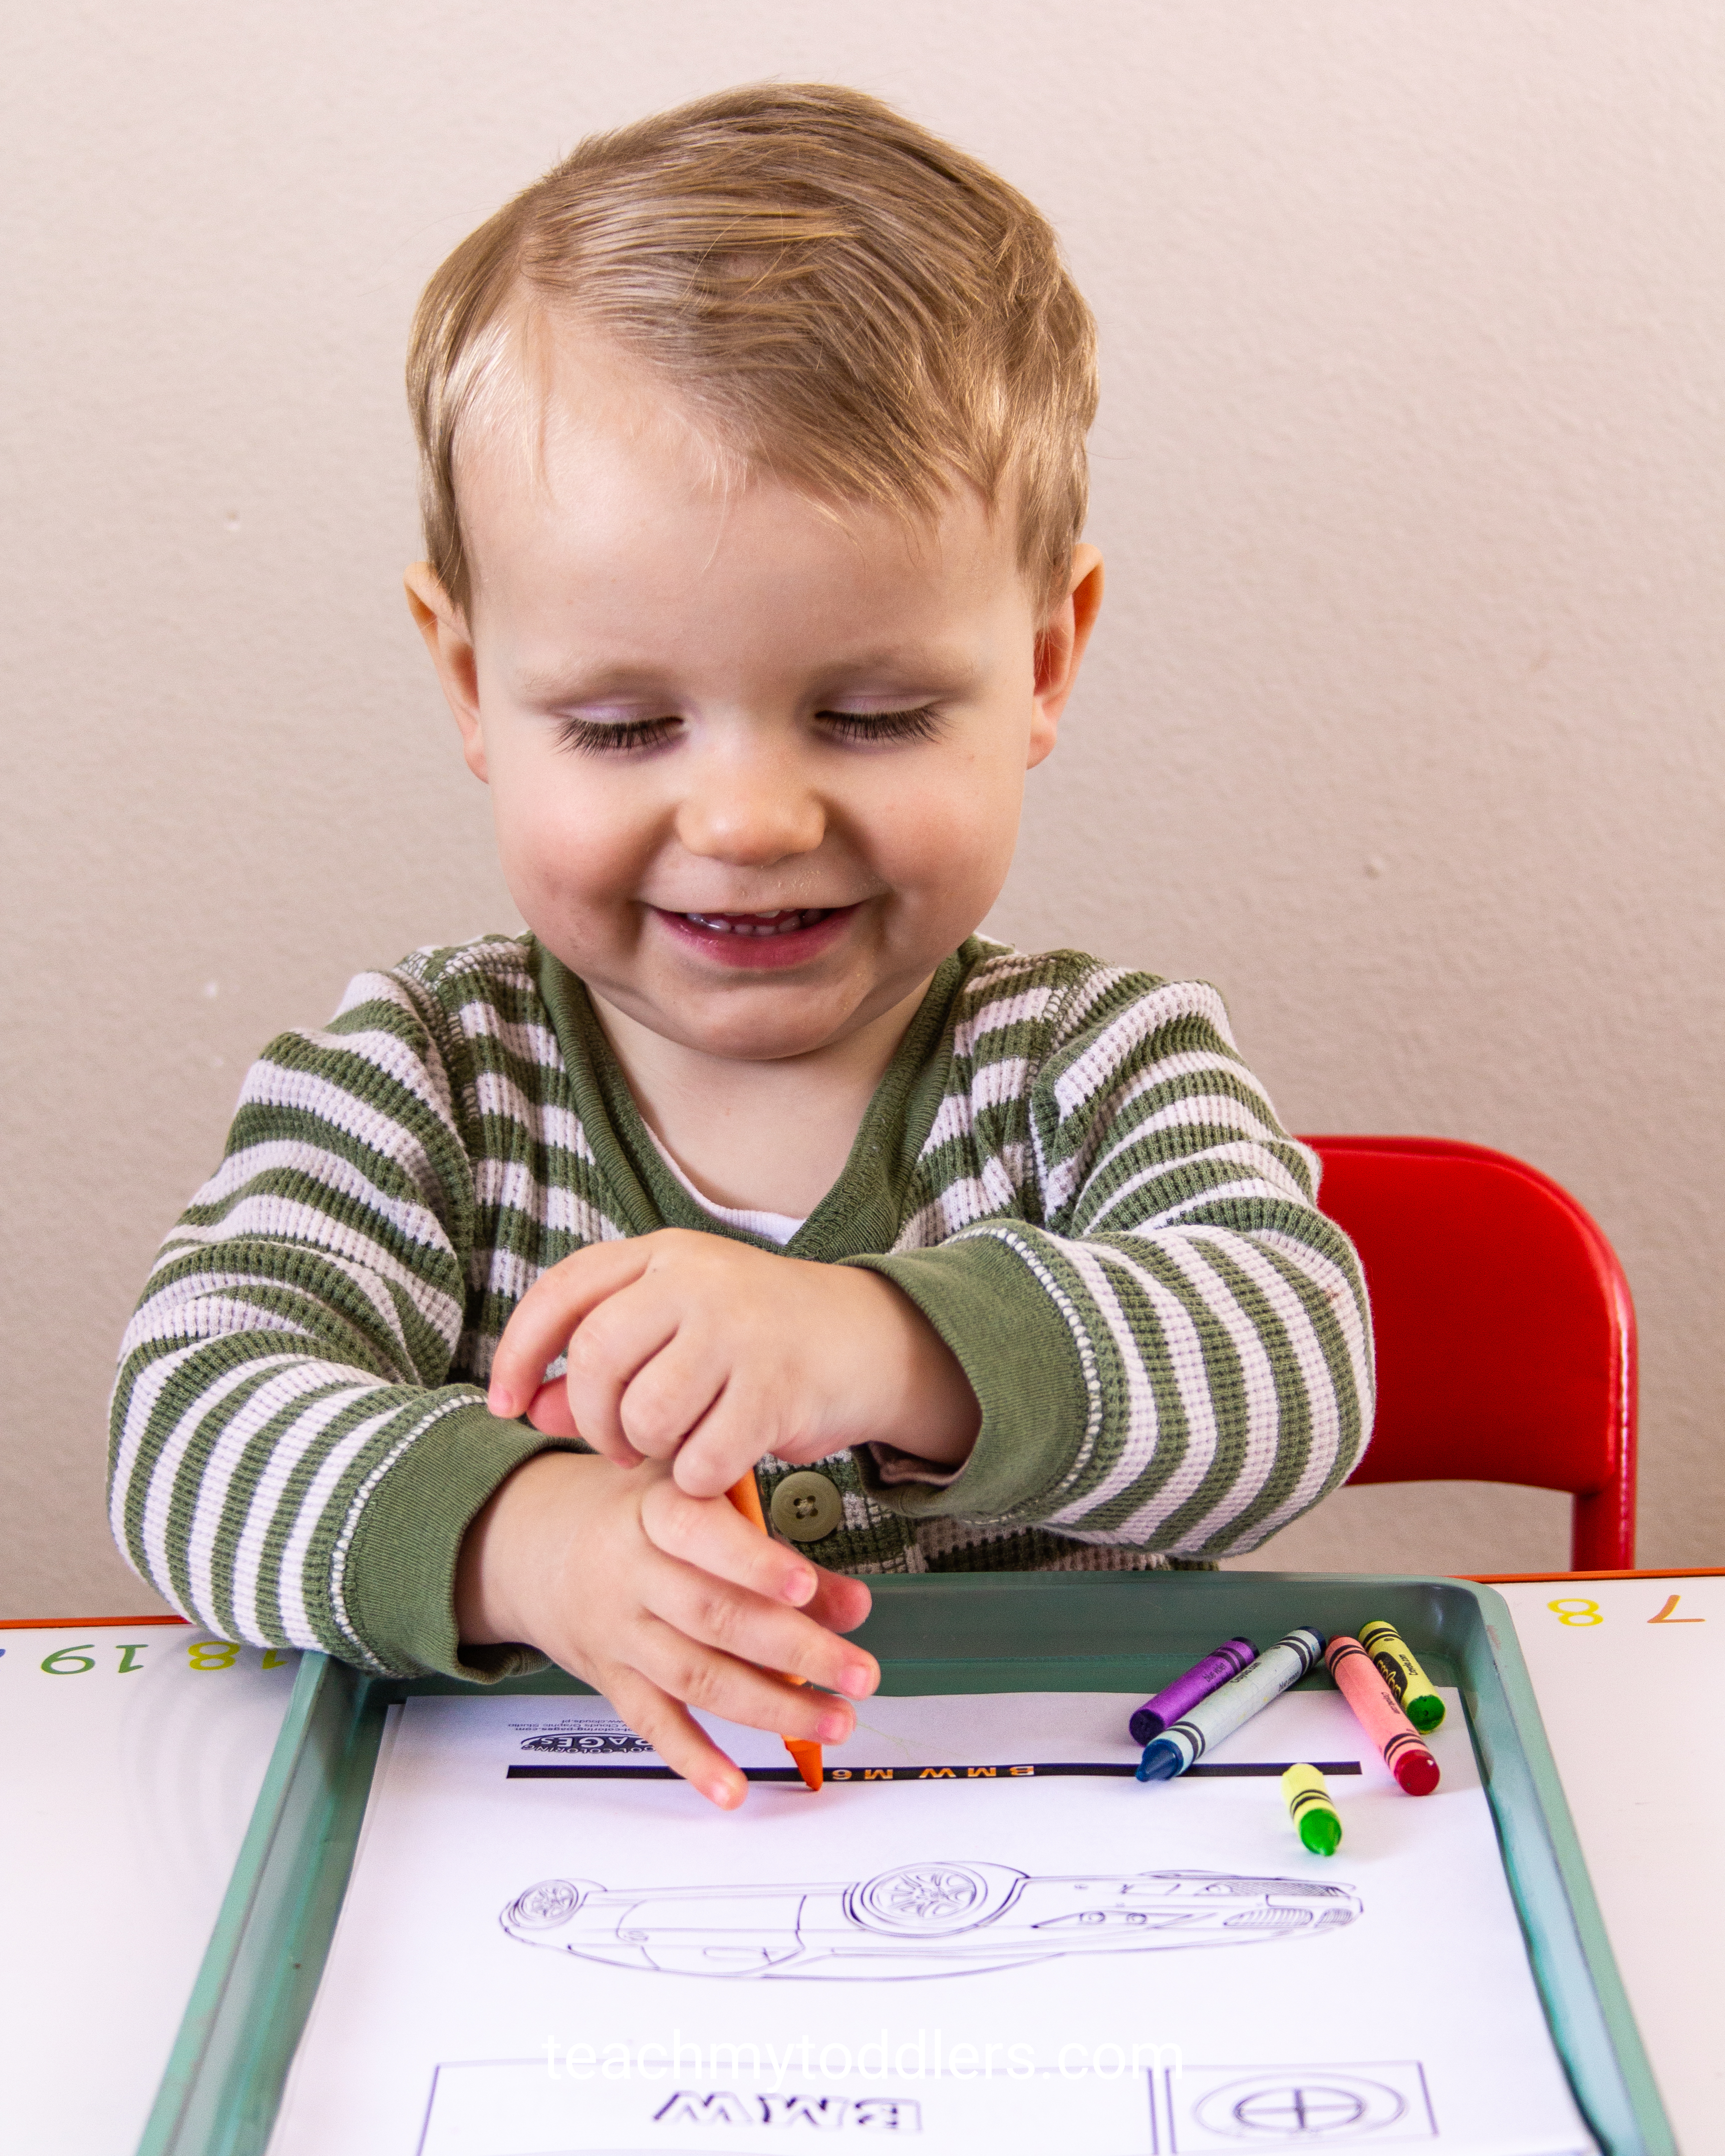 Teach your toddlers about cars using these awesome car activities